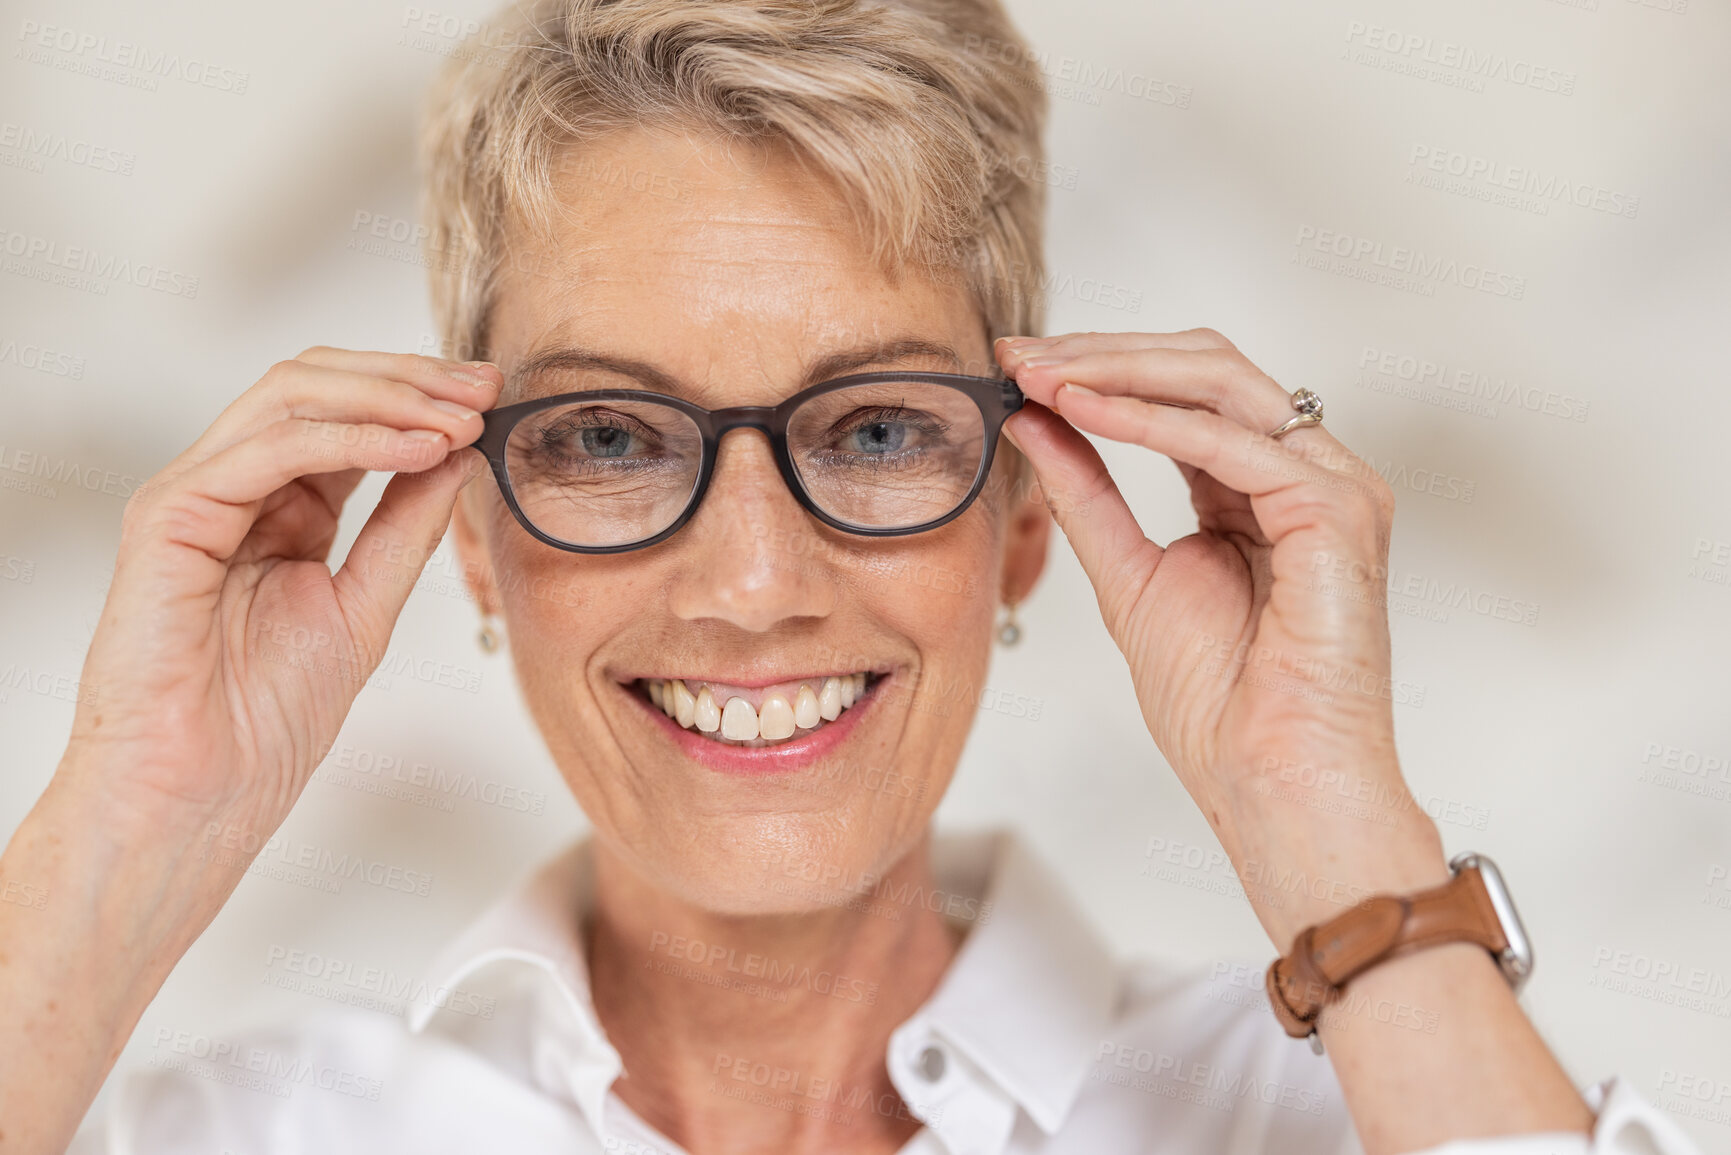 Buy stock photo Mature woman, face and vision glasses in fashion or style eye care for healthcare insurance, medical wellness or glaucoma support. Smile portrait, happy person and optometry prescription eyes lenses